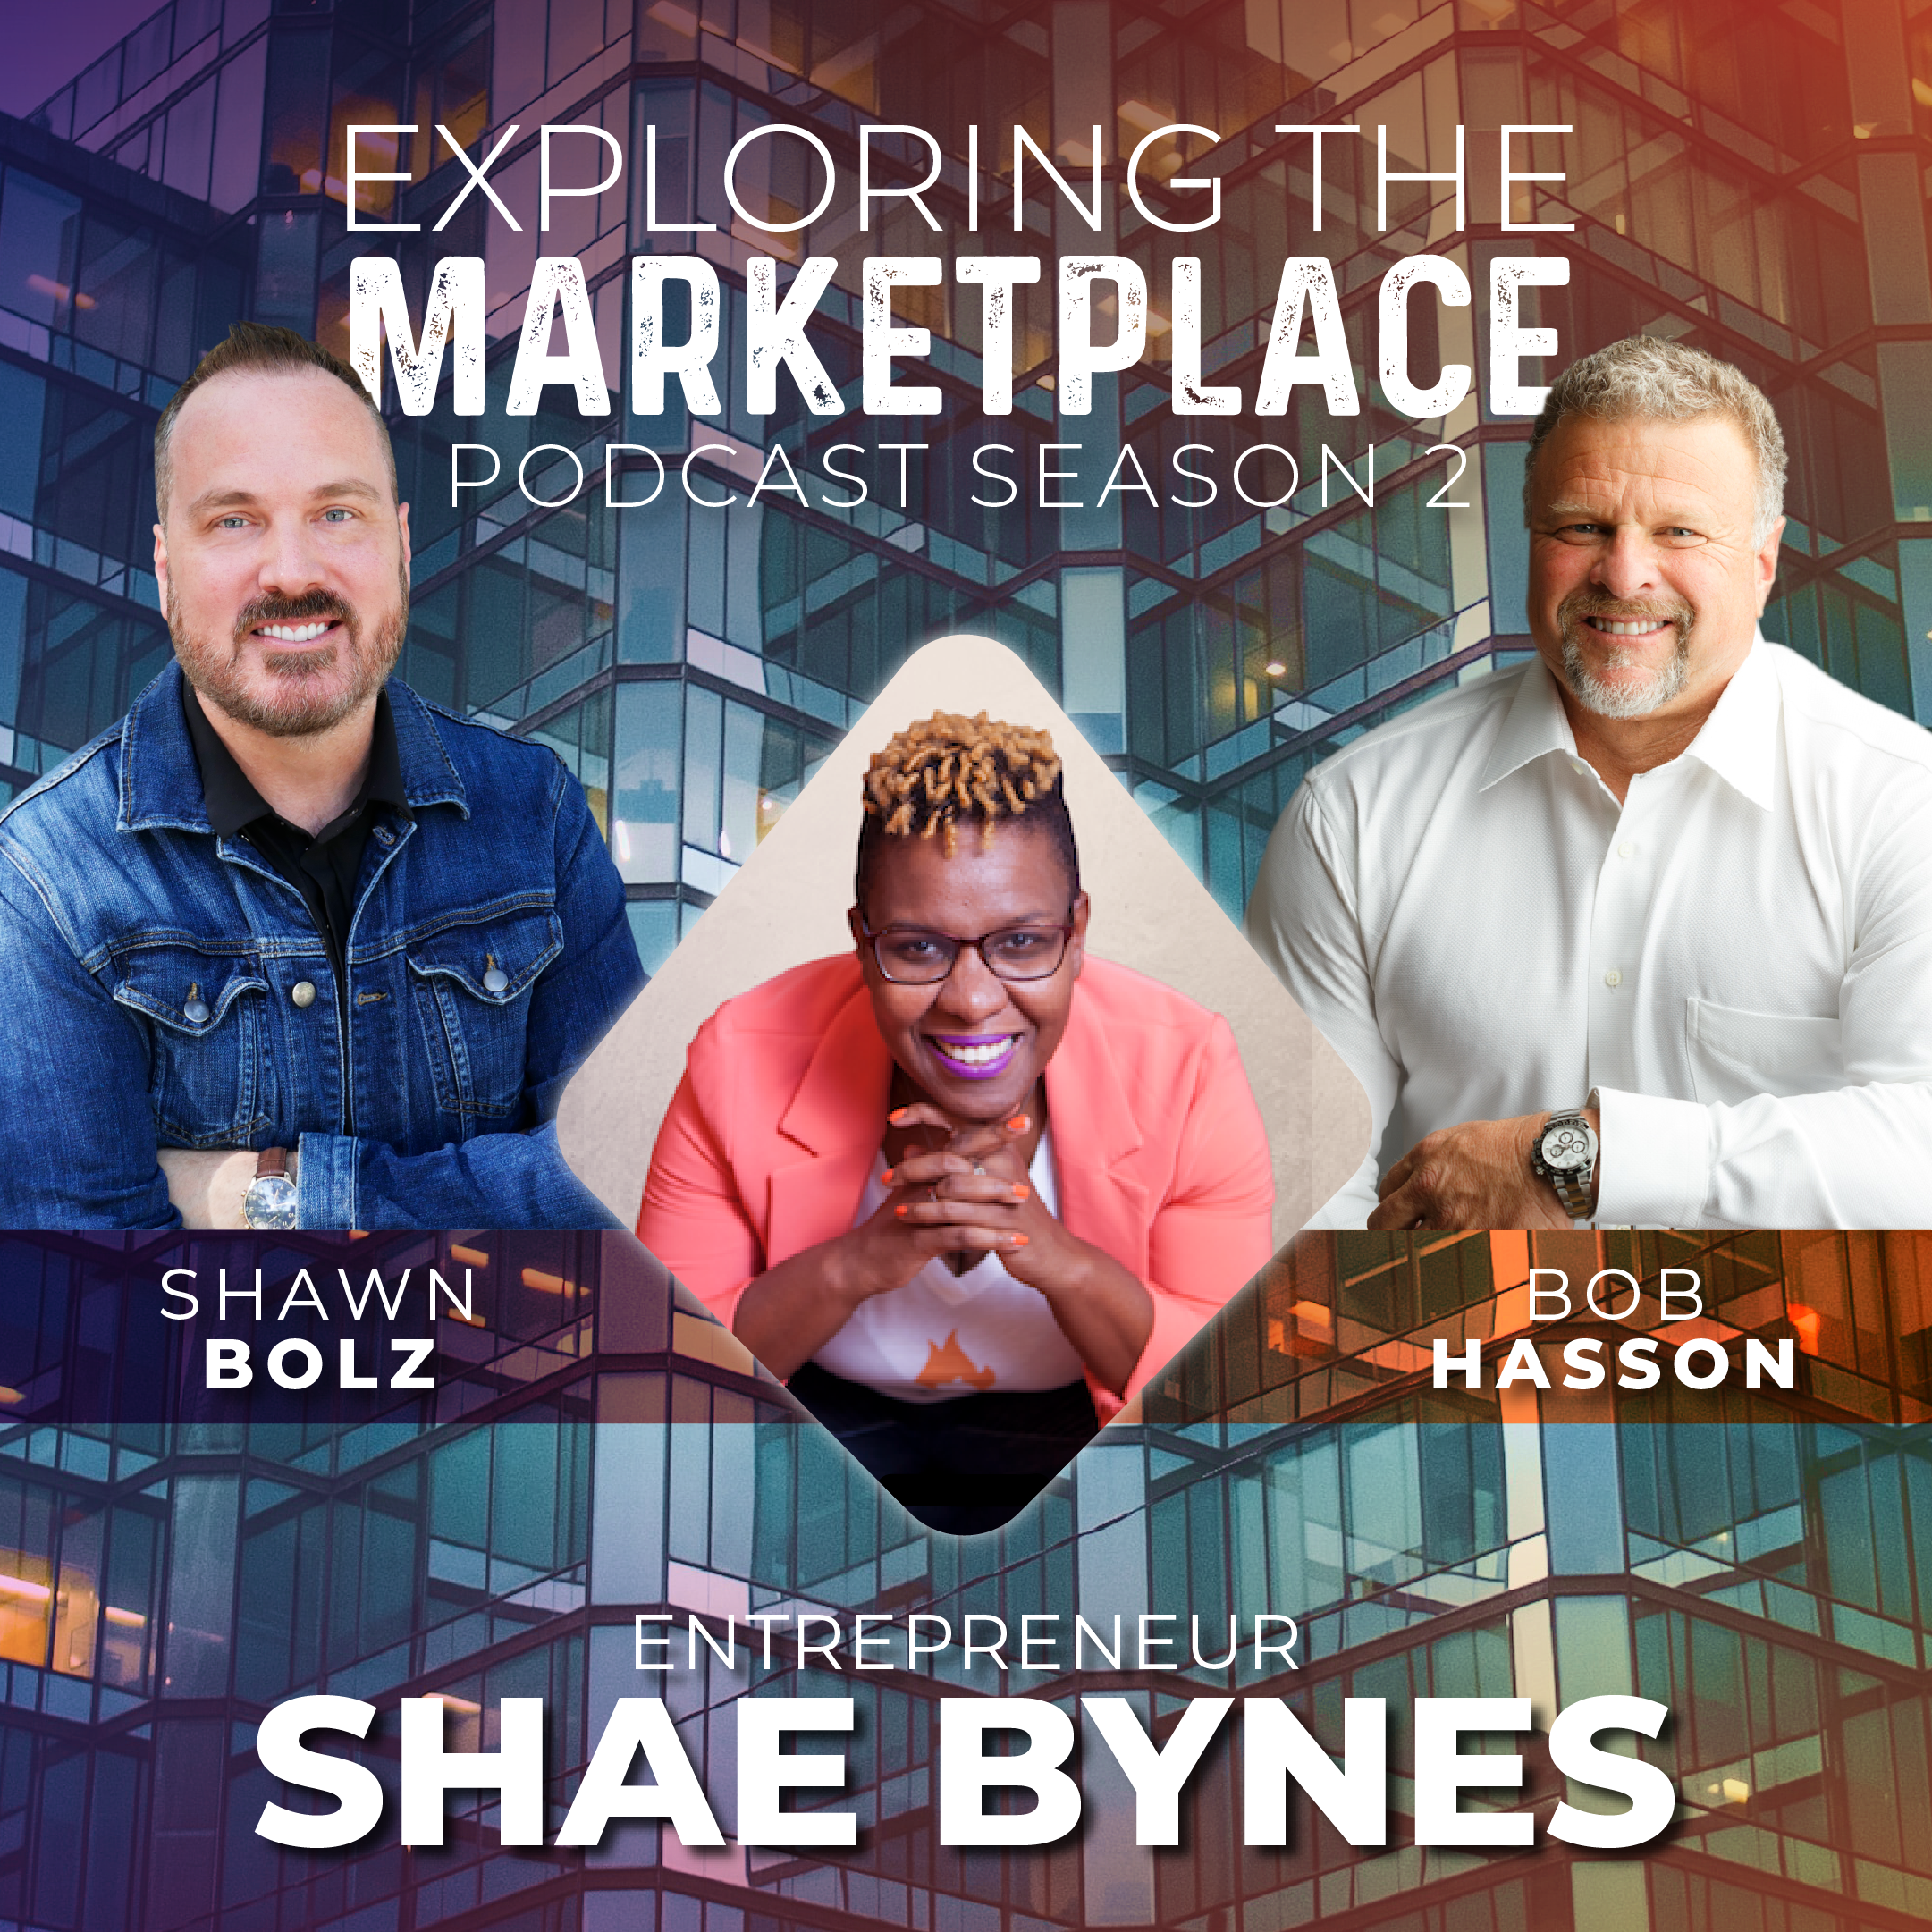 Exploring the Marketplace with Entrepreneur, Shae Bynes  (S:2 - Ep 6)